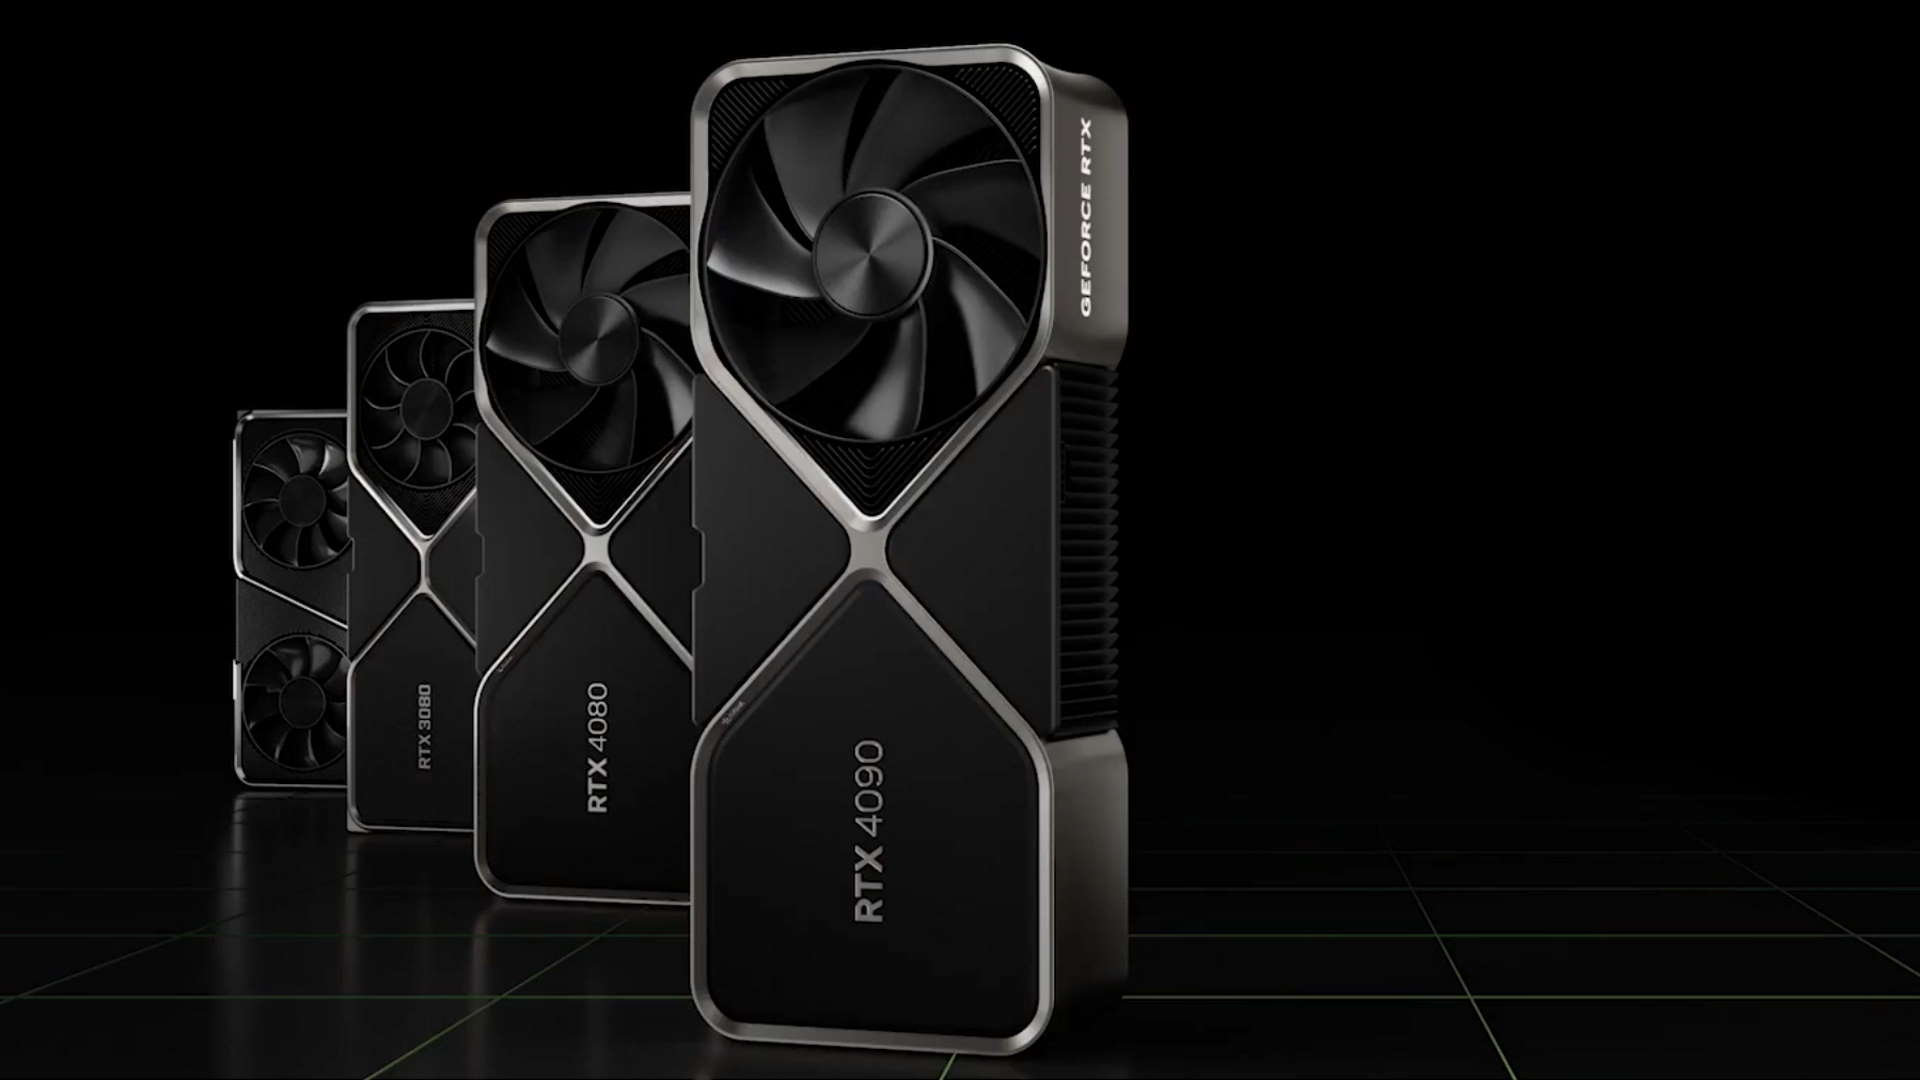 Very Expensive: First reactions on Nvidia's RTX 4090, RTX 4080